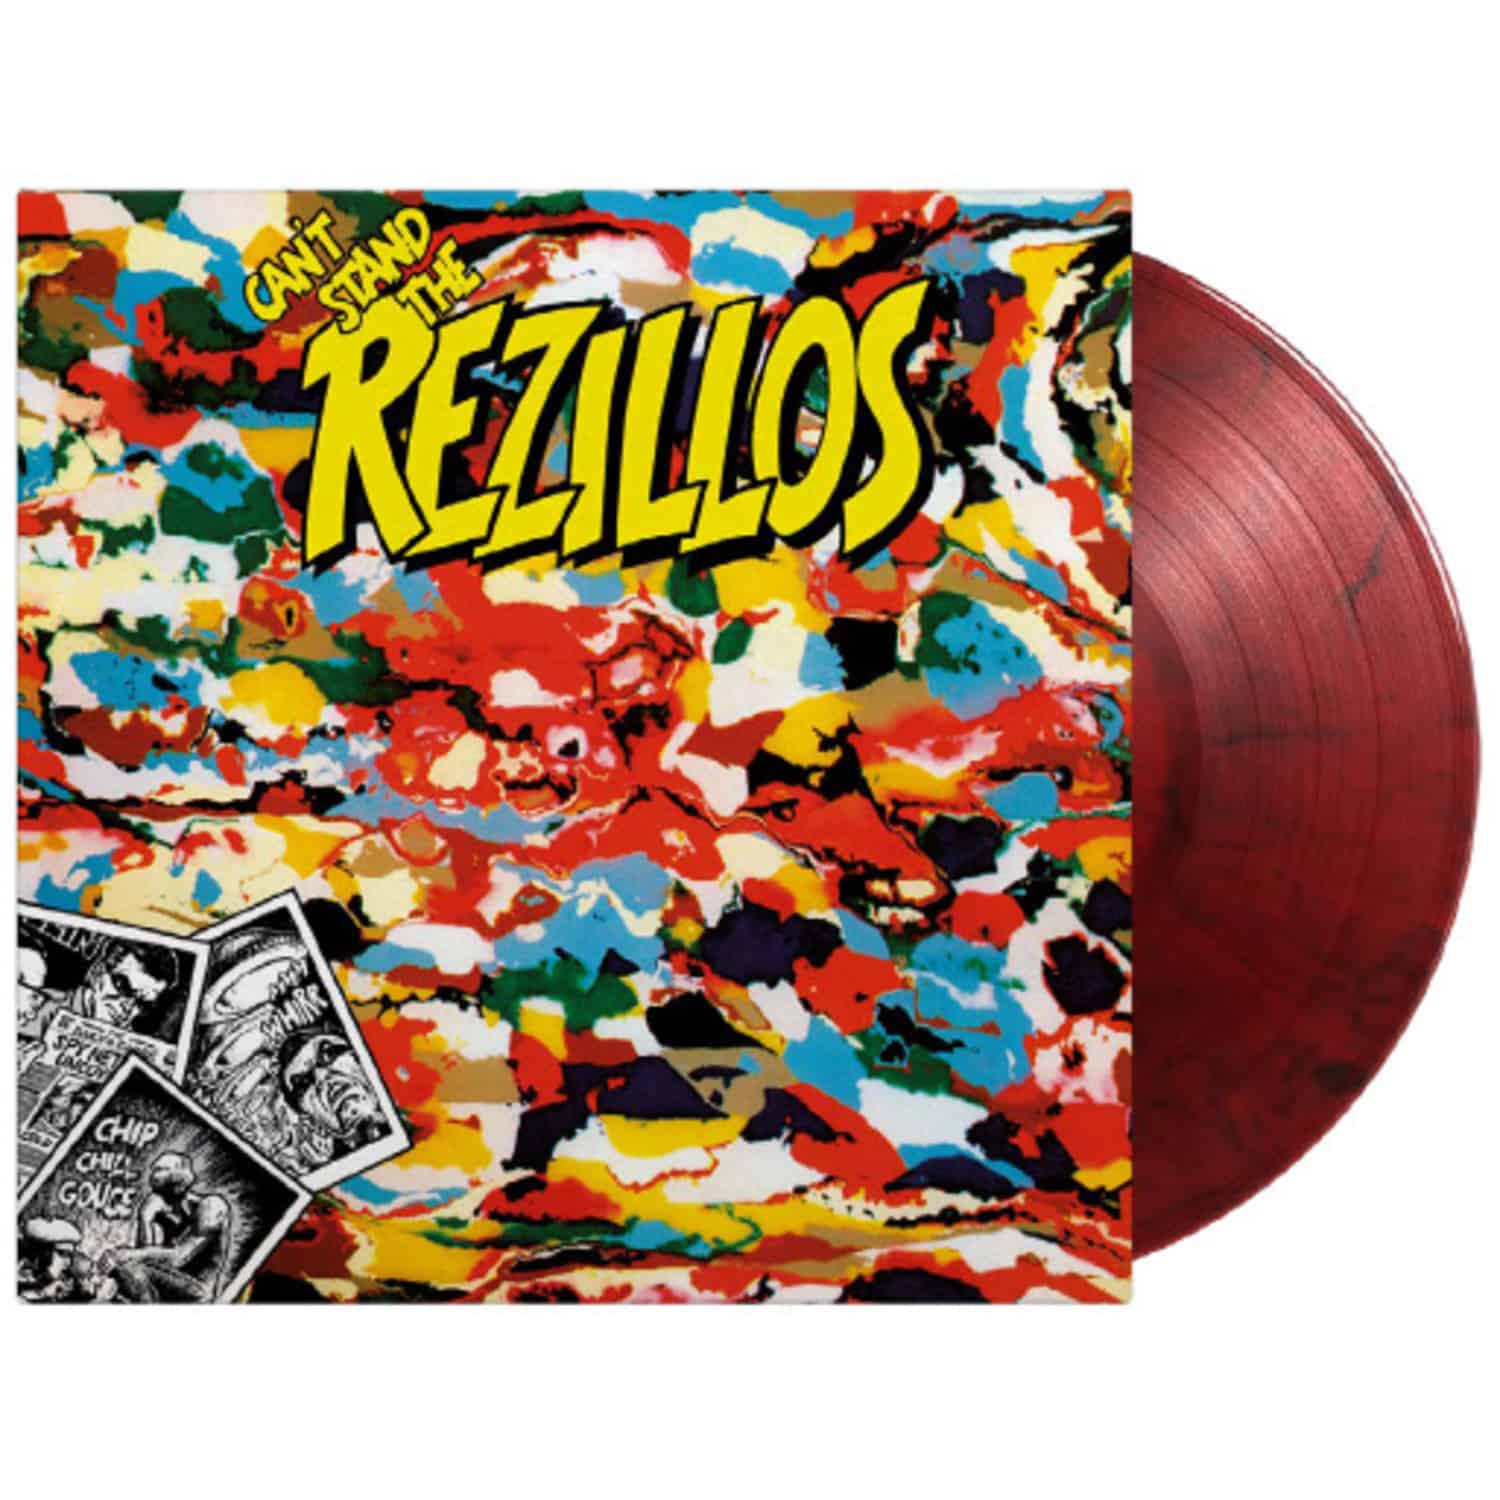 Rezillos - CAN T STAND THE REZILLOS 